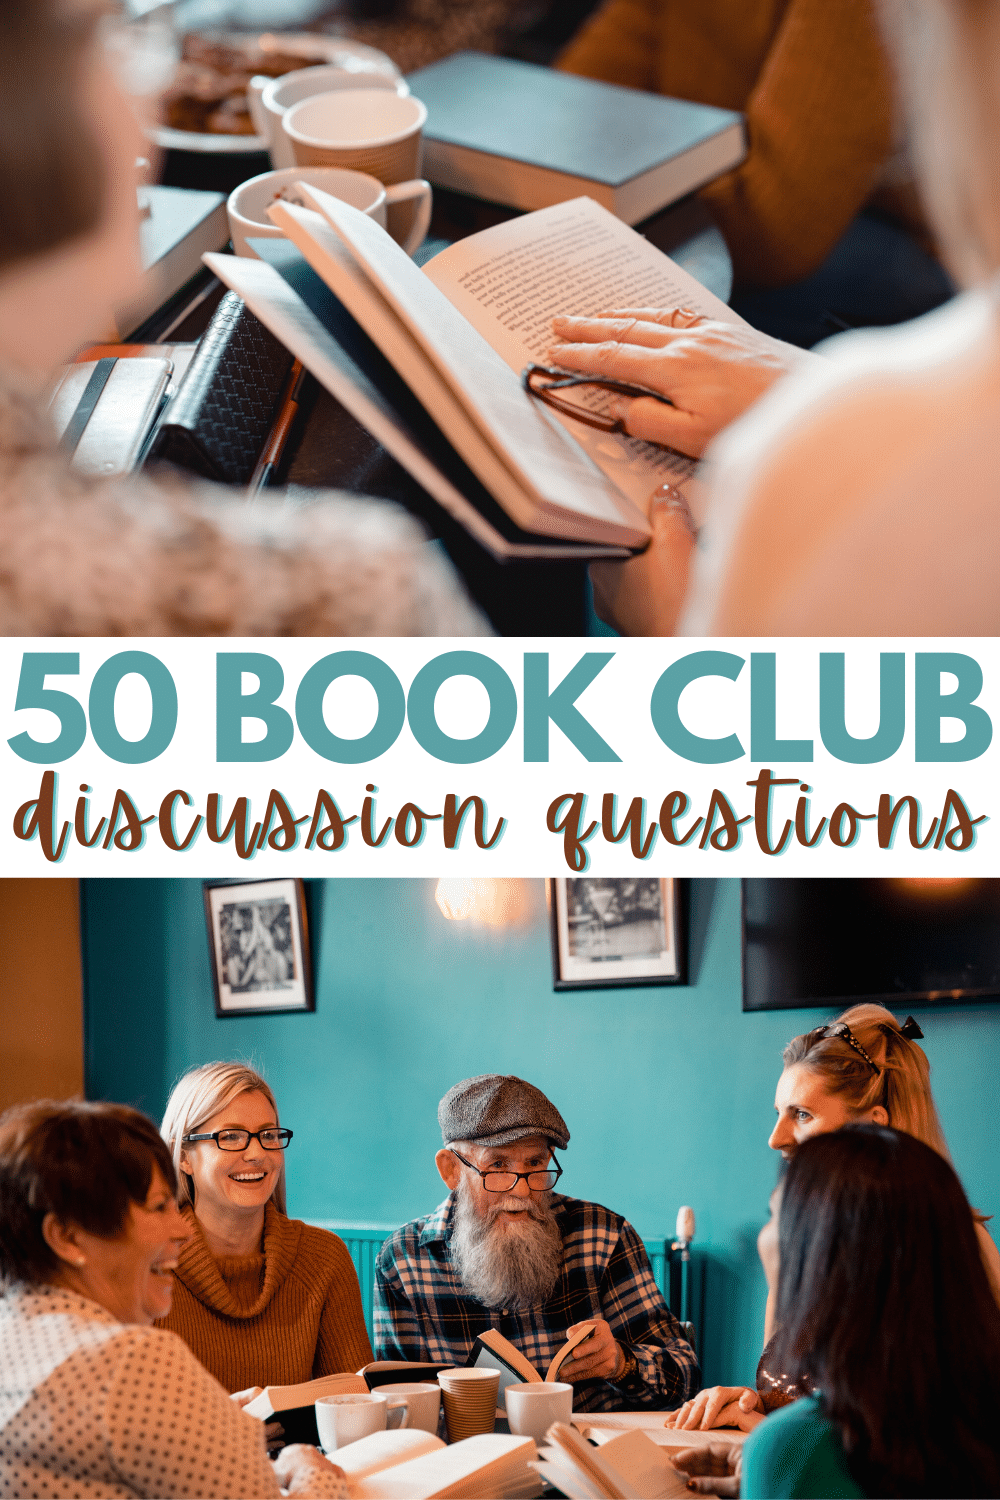 Make every book club discussion a meaningful one with these simple, but compelling book club questions that work for any book. #bookclub #books via @wondermomwannab